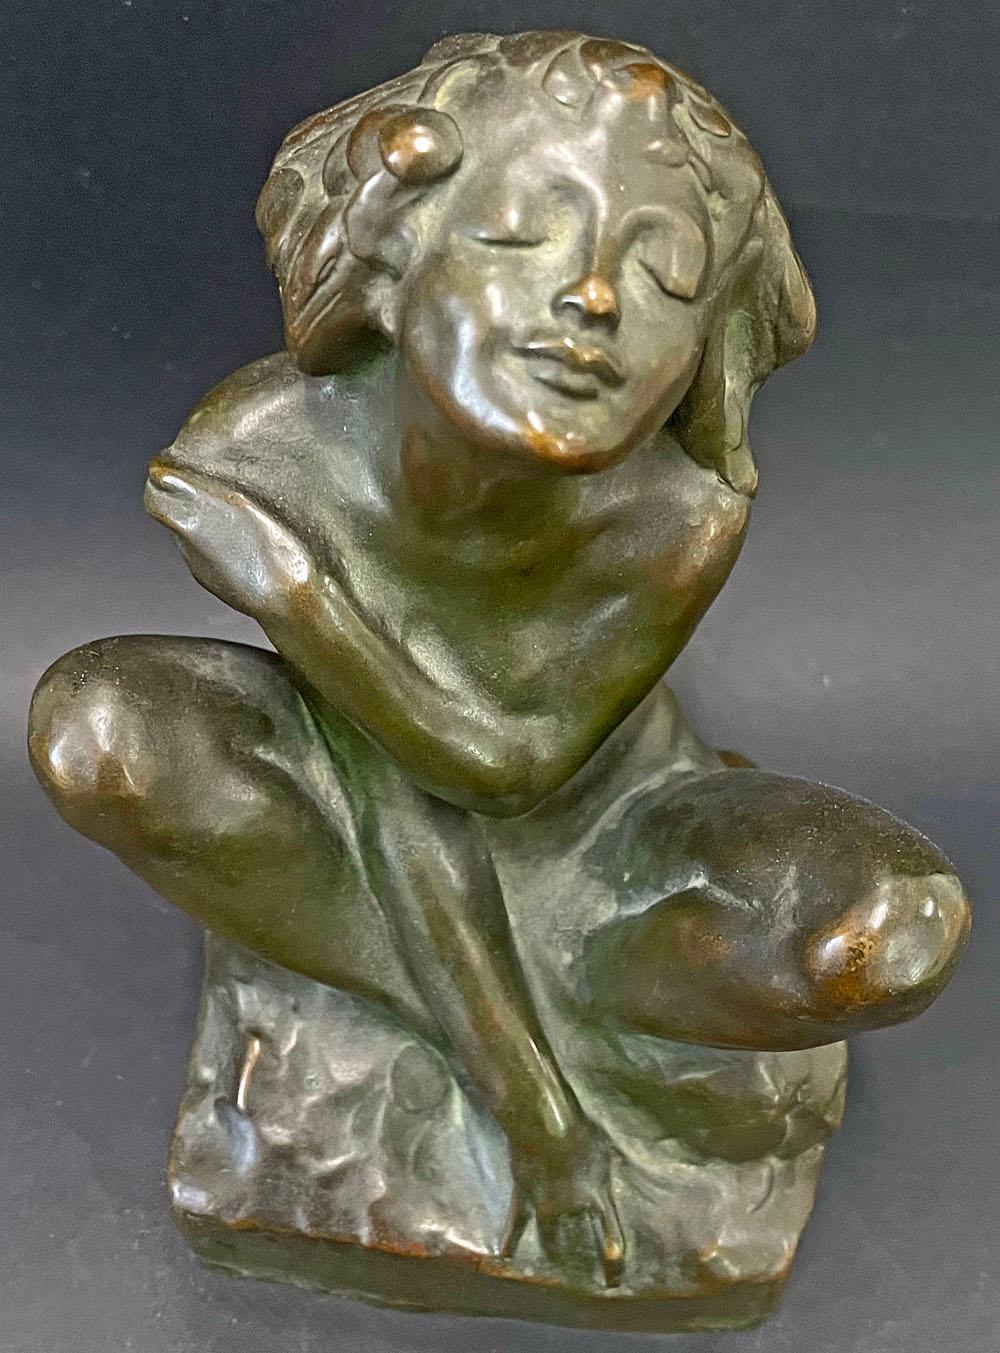 A beautiful and sublime personification of contentment and bliss, this bronze was sculpted by John Gregory -- who later executed 9 large bas relief panels for the Folger Shakespeare Library in Washington, D.C. -- when he was only 28 years old.